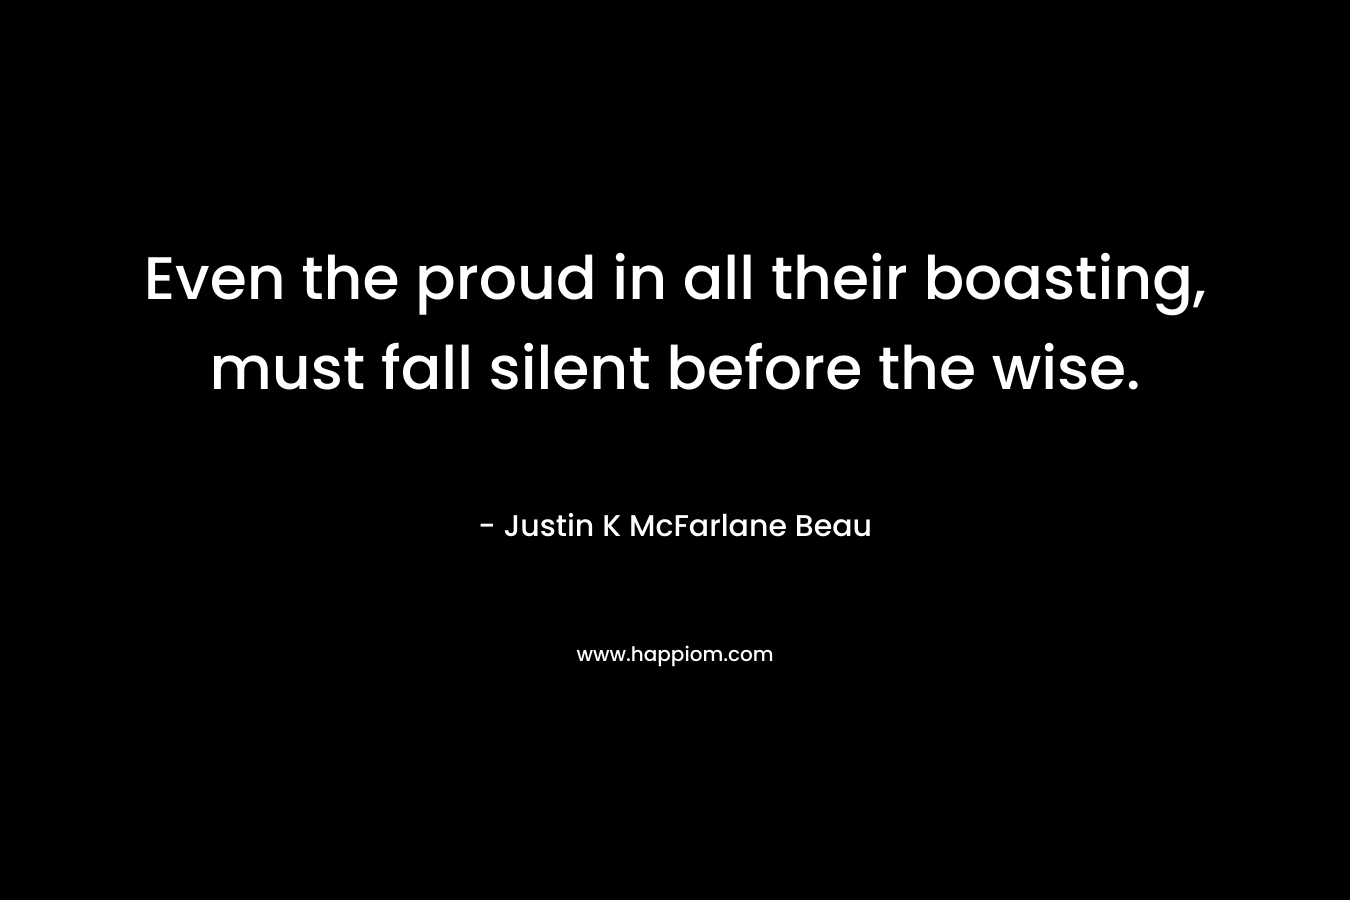 Even the proud in all their boasting, must fall silent before the wise. – Justin K McFarlane Beau